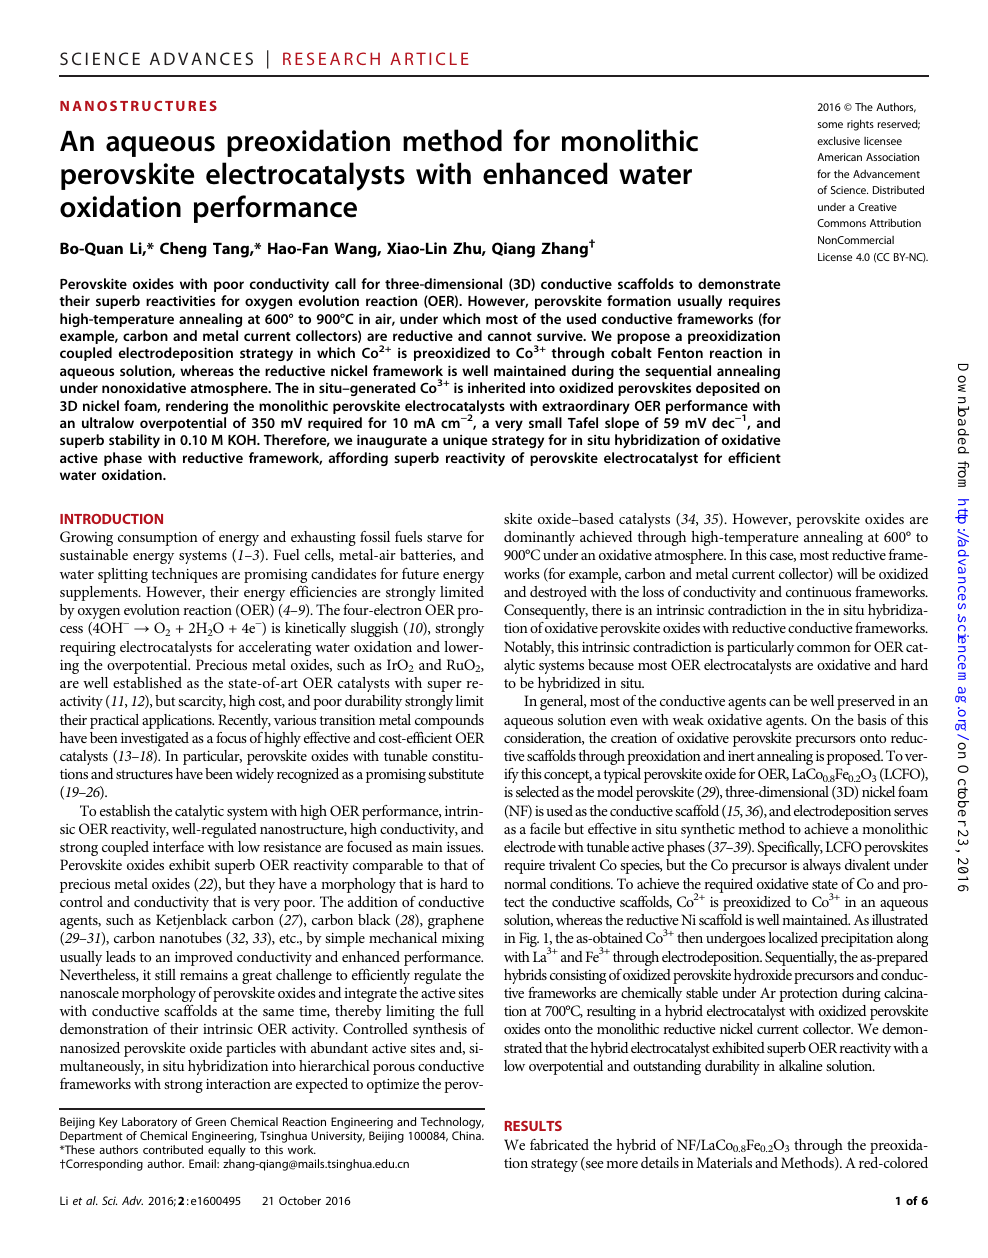 An Aqueous Preoxidation Method For Monolithic Perovskite Electrocatalysts With Enhanced Water Oxidation Performance Topic Of Research Paper In Nano Technology Download Scholarly Article Pdf And Read For Free On Cyberleninka Open Science